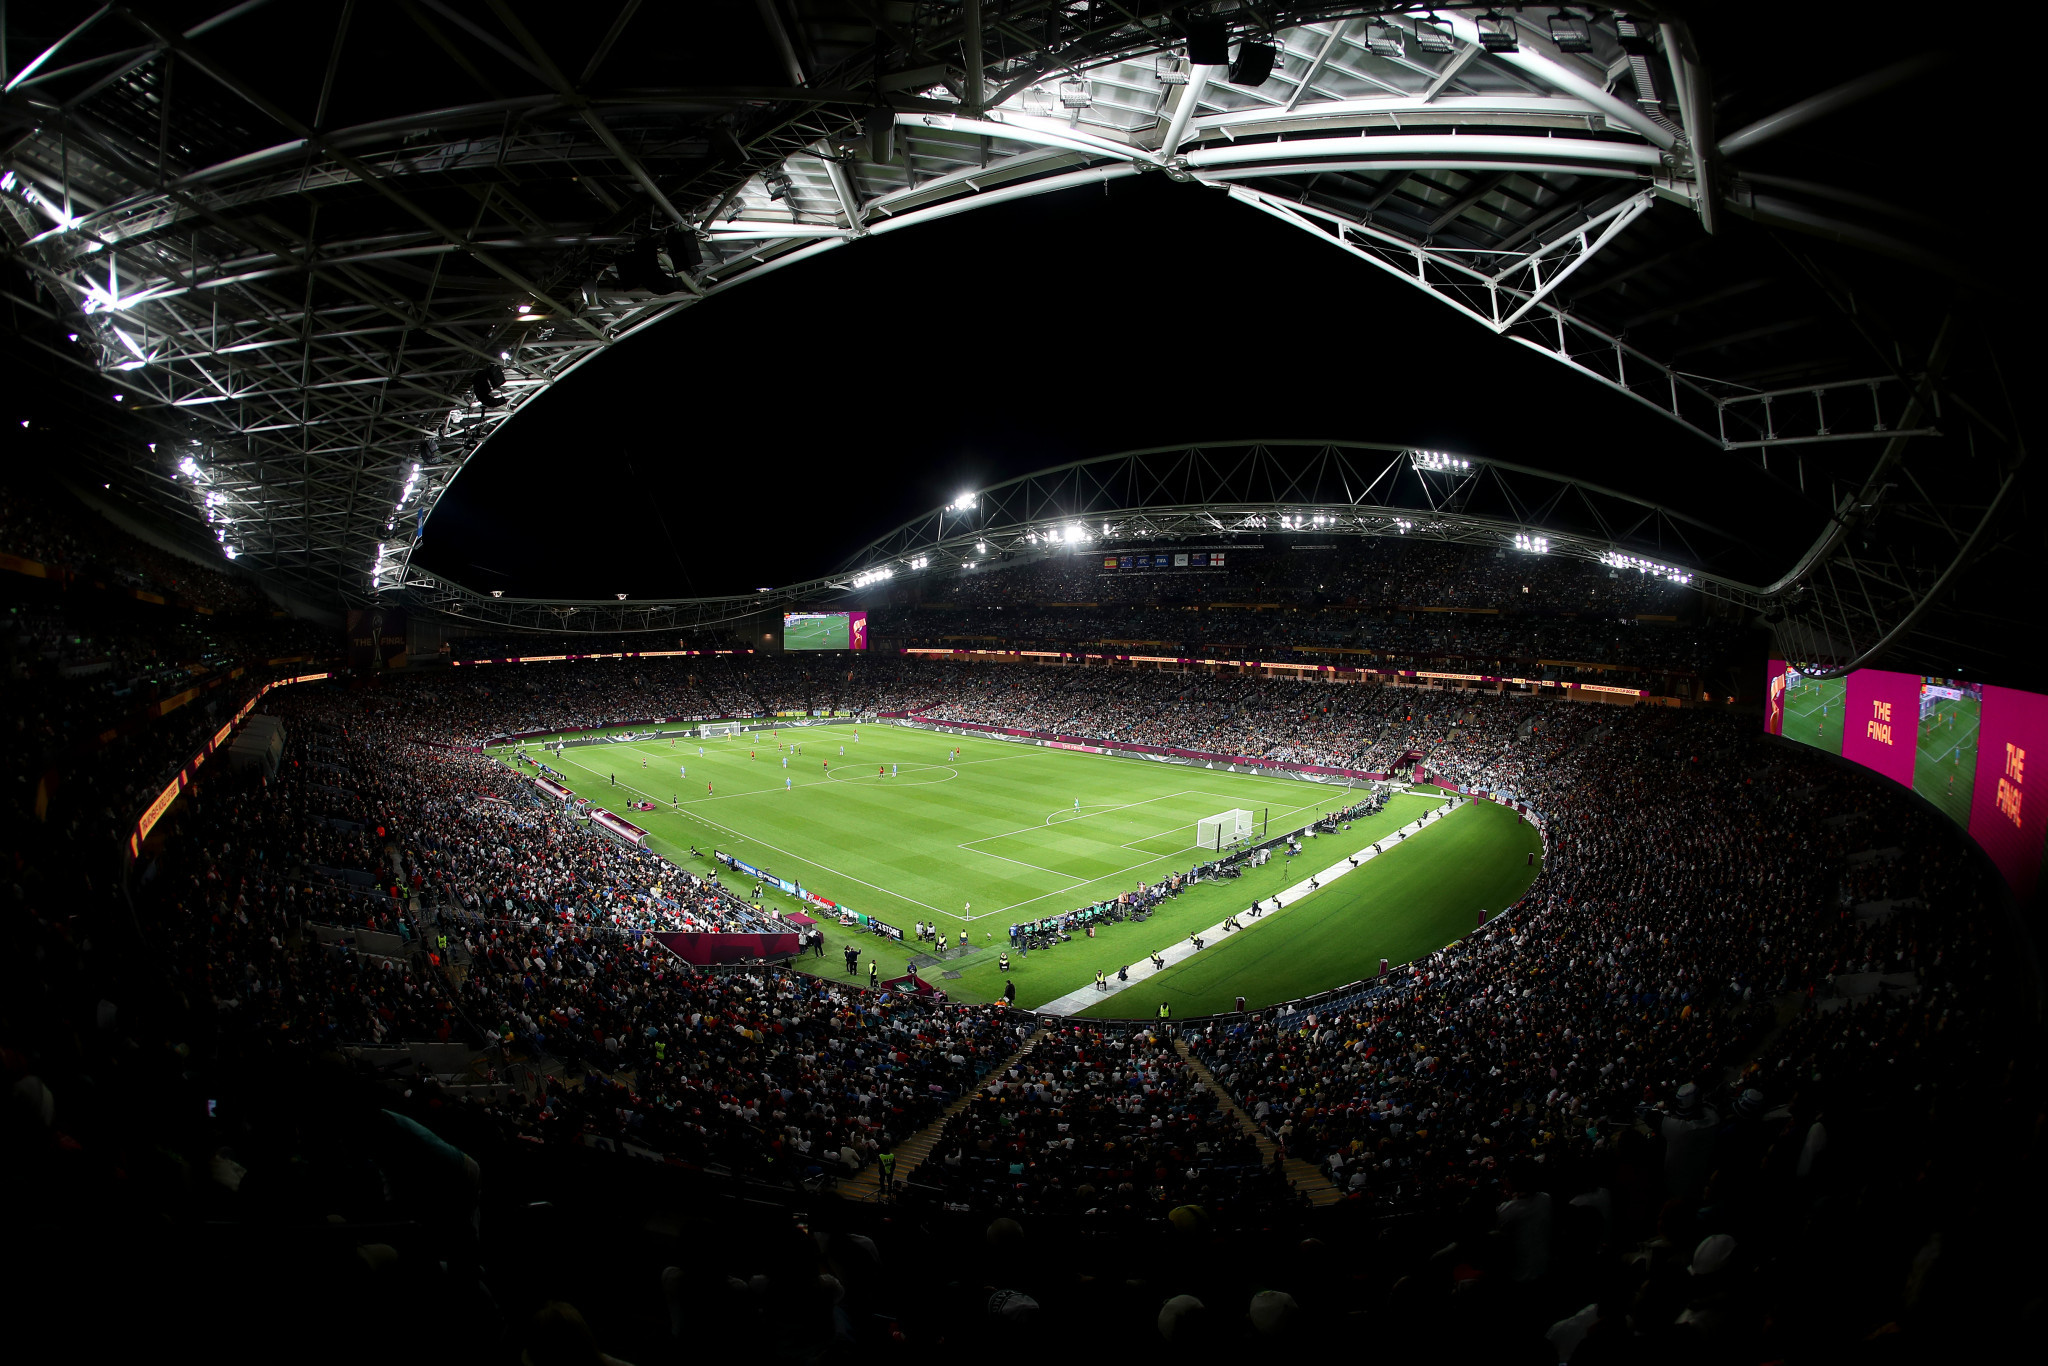 Although Australia co-hosted this year's FIFA Women's World Cup, the men's tournament for 2034 requires at least 14 venues with a capacity of 40,000 ©Getty Images